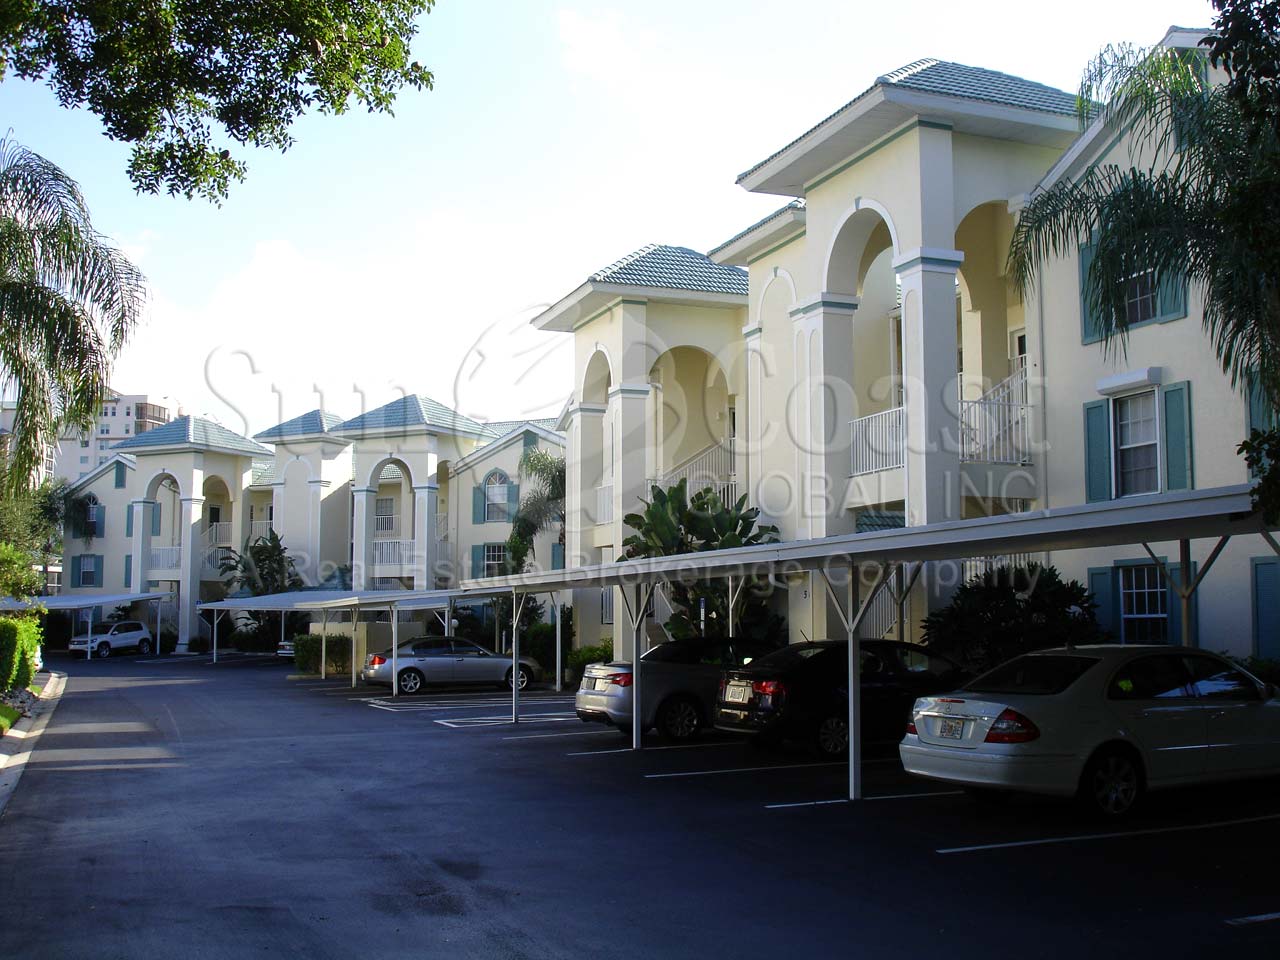 Bermuda Cove Condominiums with Covered Parking